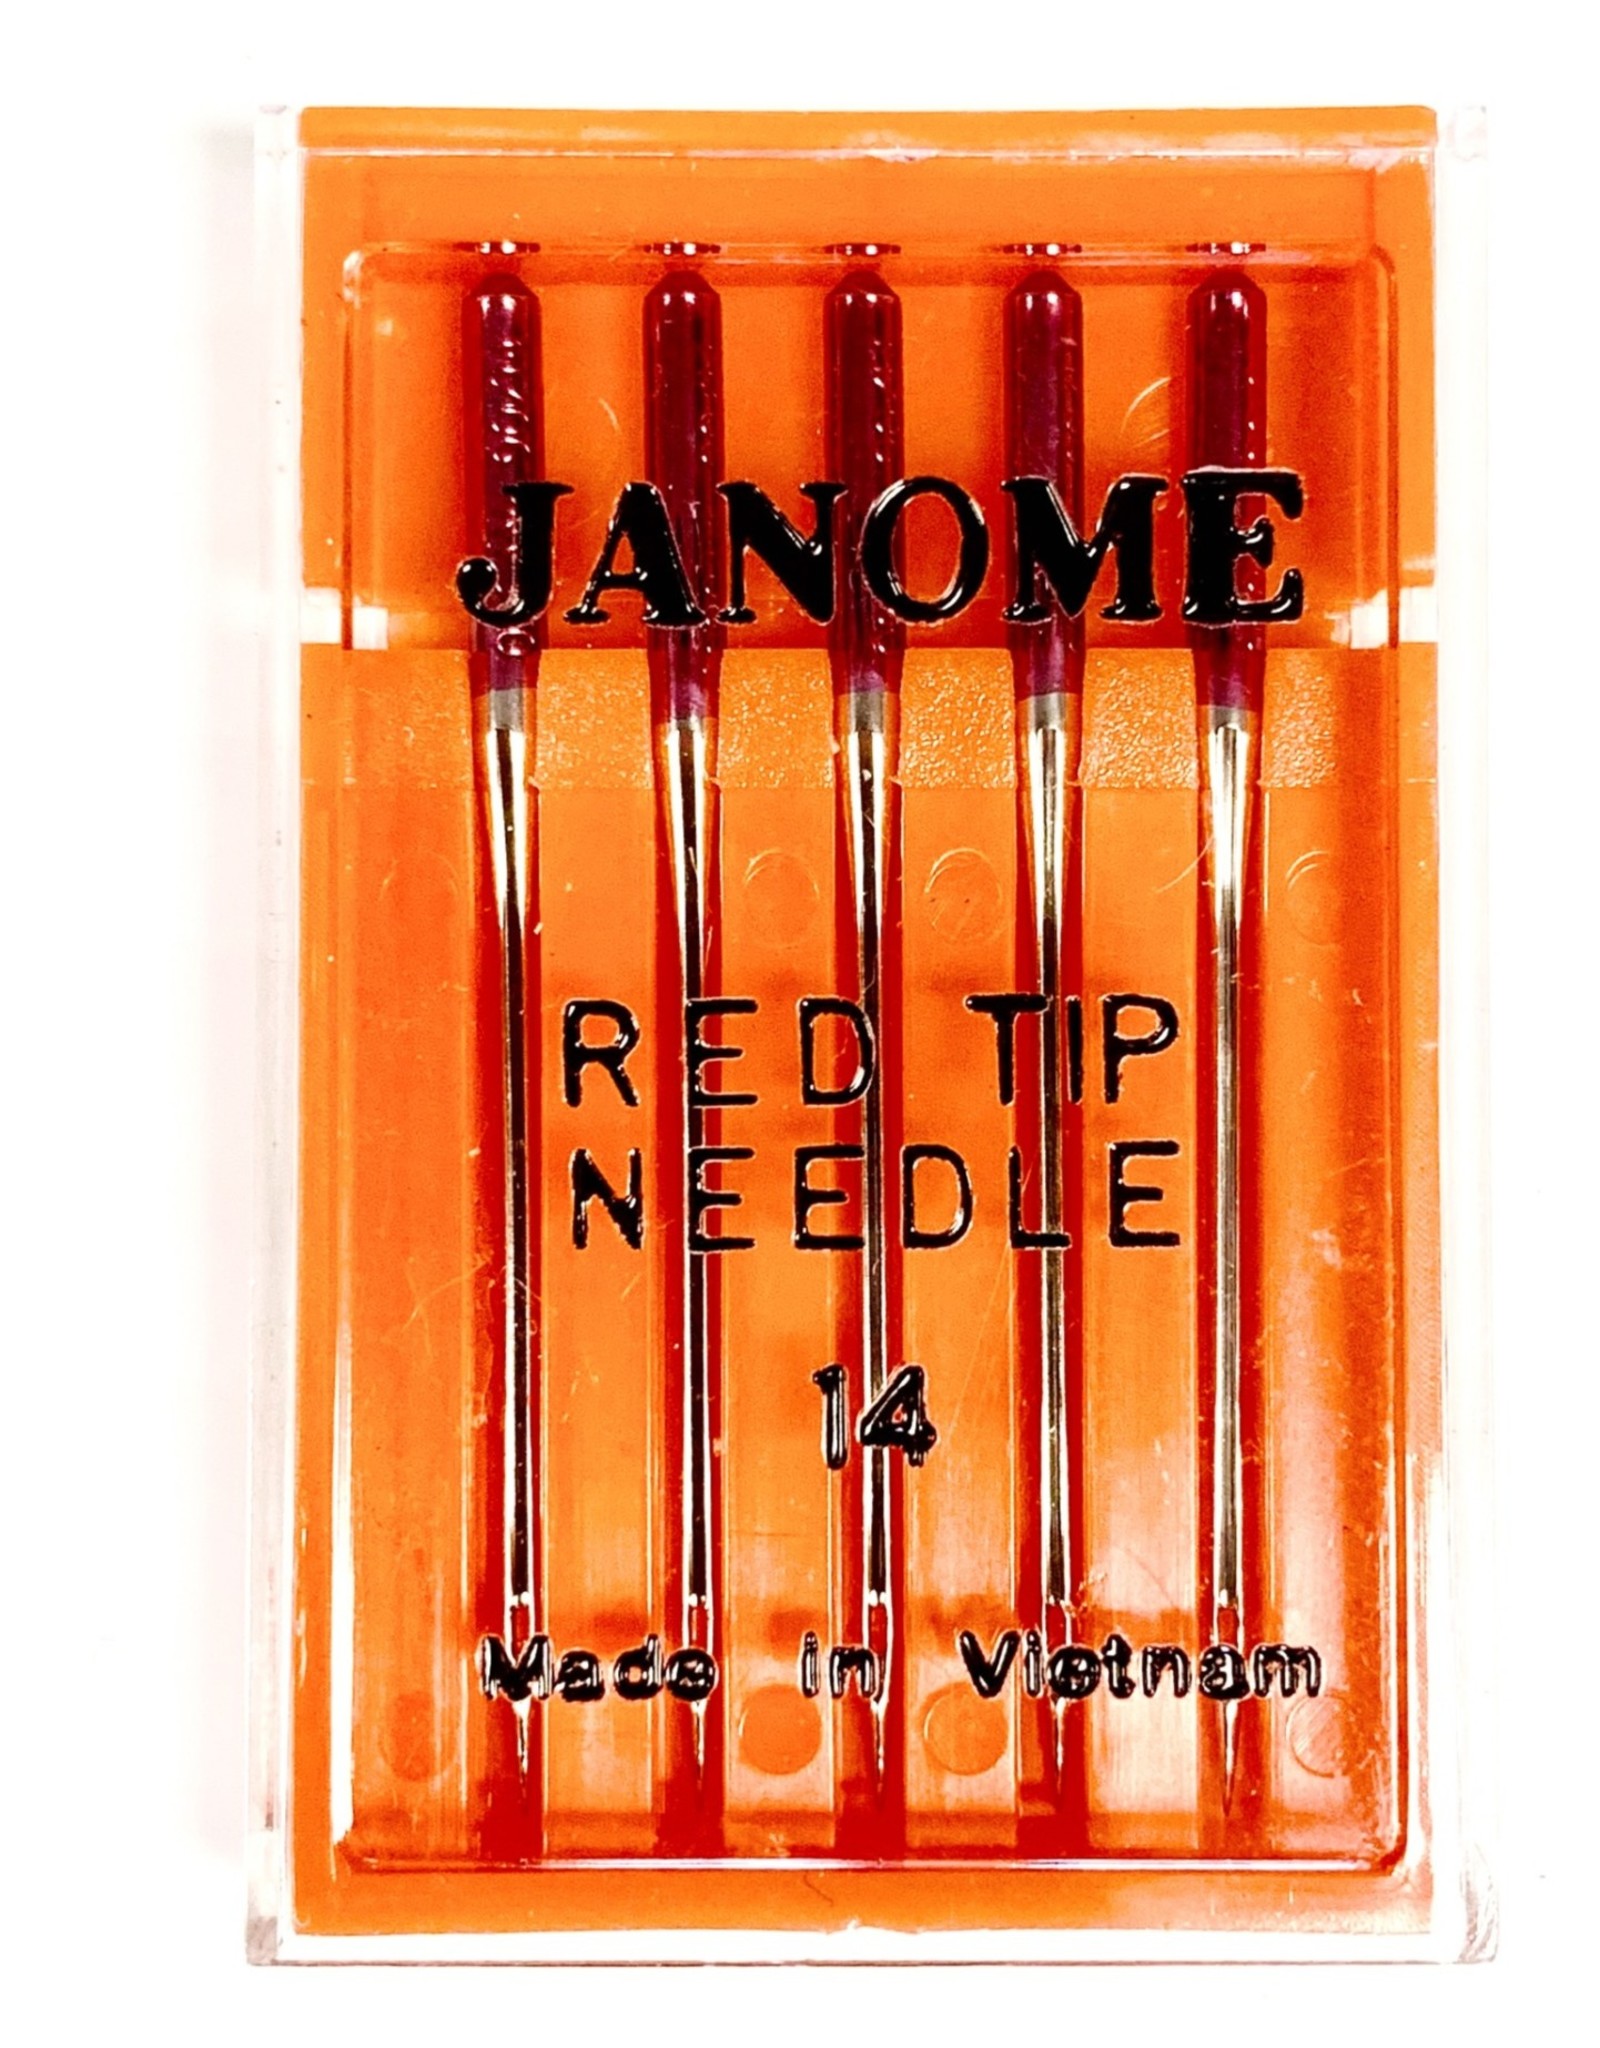 Janome Red Tip Needle 14